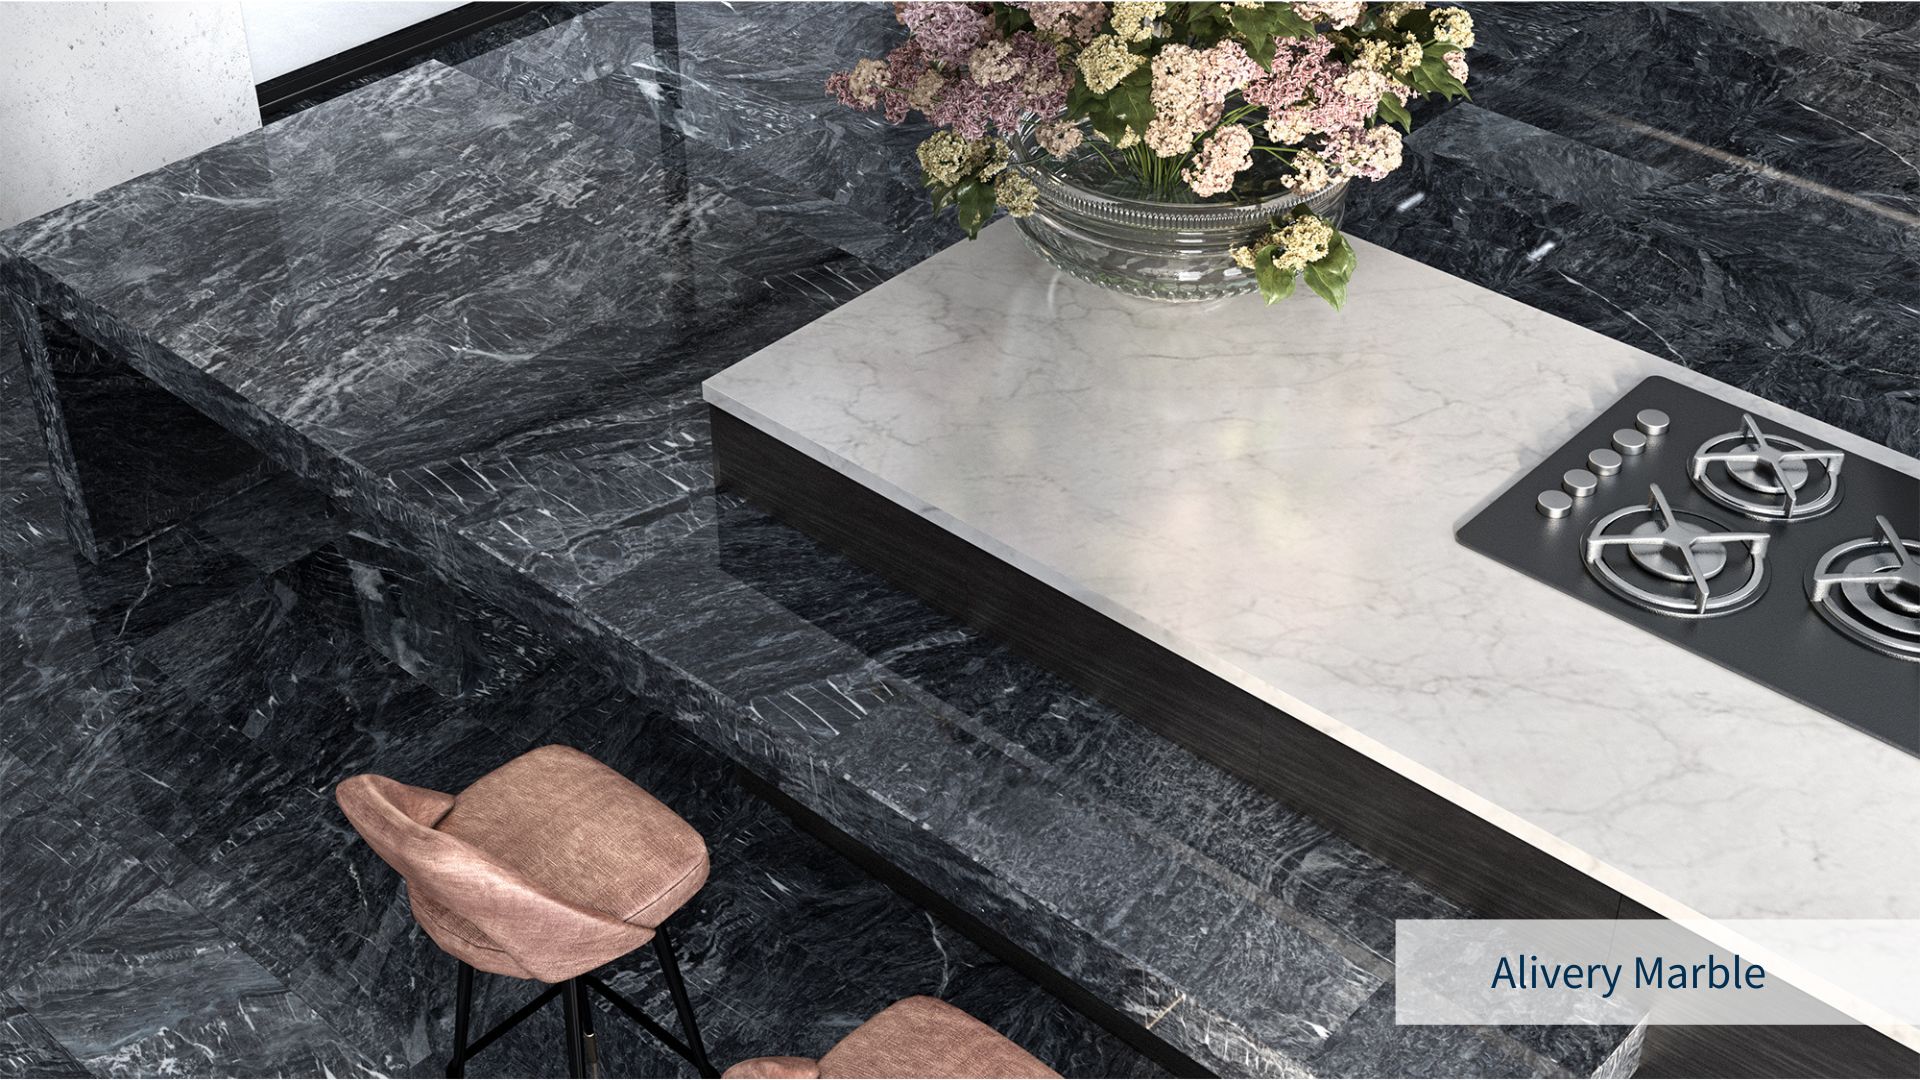 Close-up image from above of a kitchen island and countertop with dark grey marble Aliveri with white and gray veins